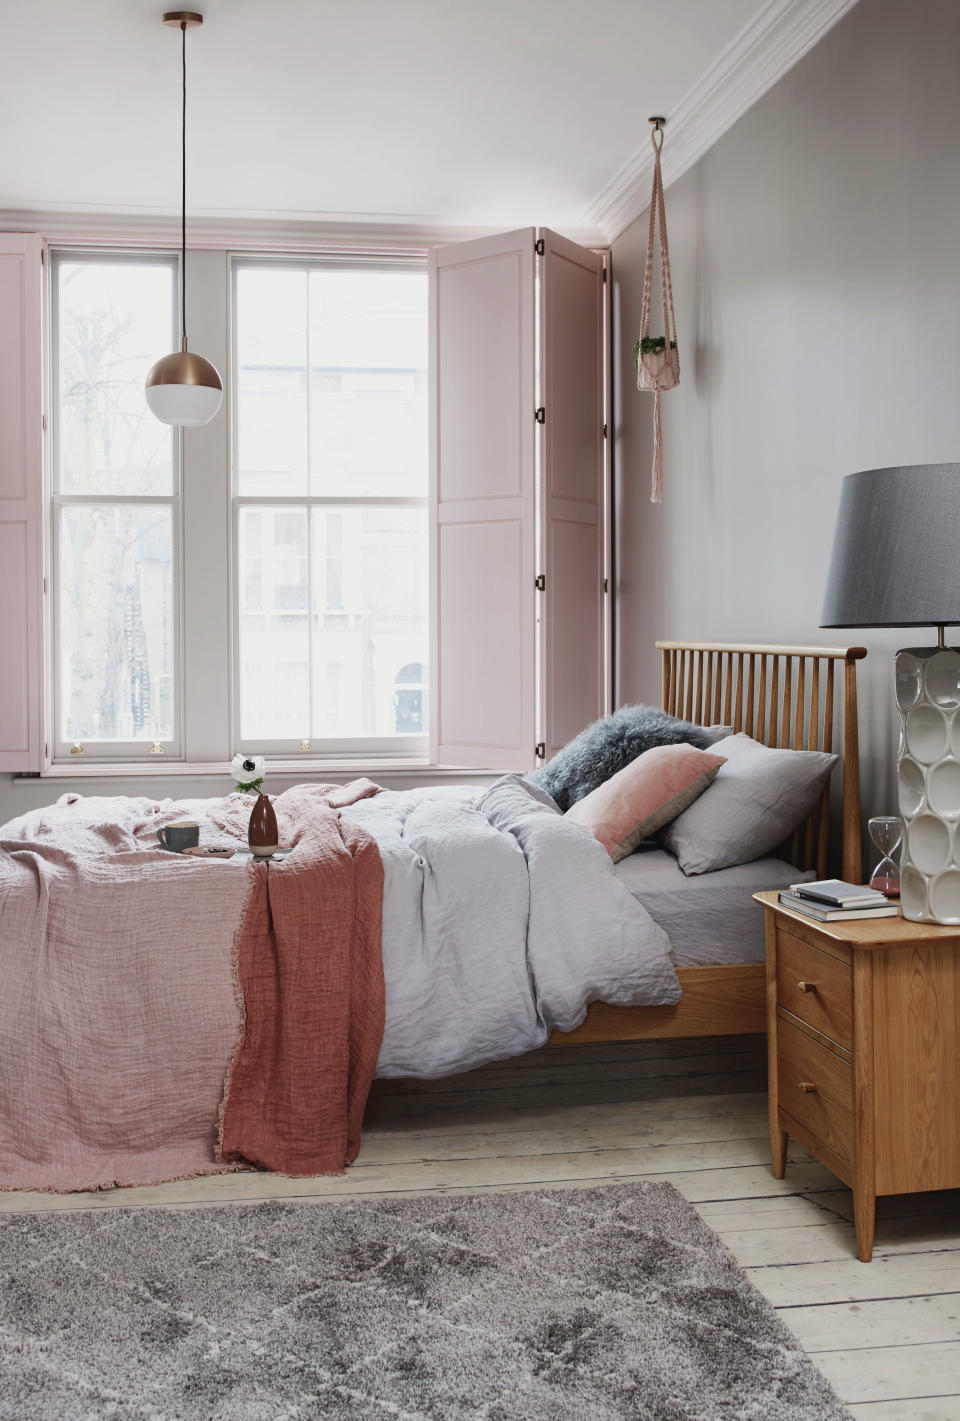 Add softness to a bedroom with blush hues